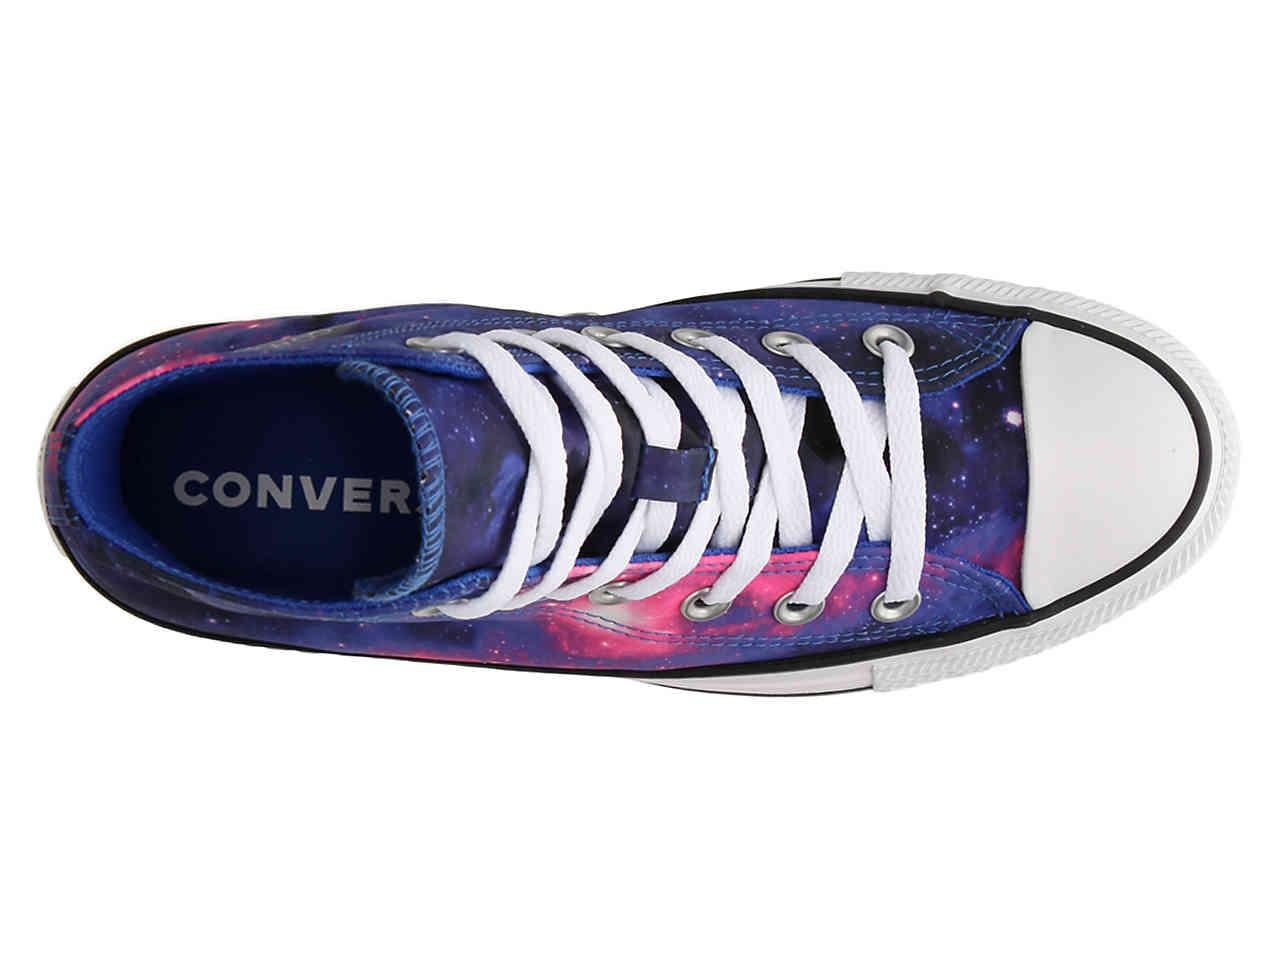 Converse Canvas Chuck Taylor All Star Galaxy High-top Sneaker in Blue | Lyst